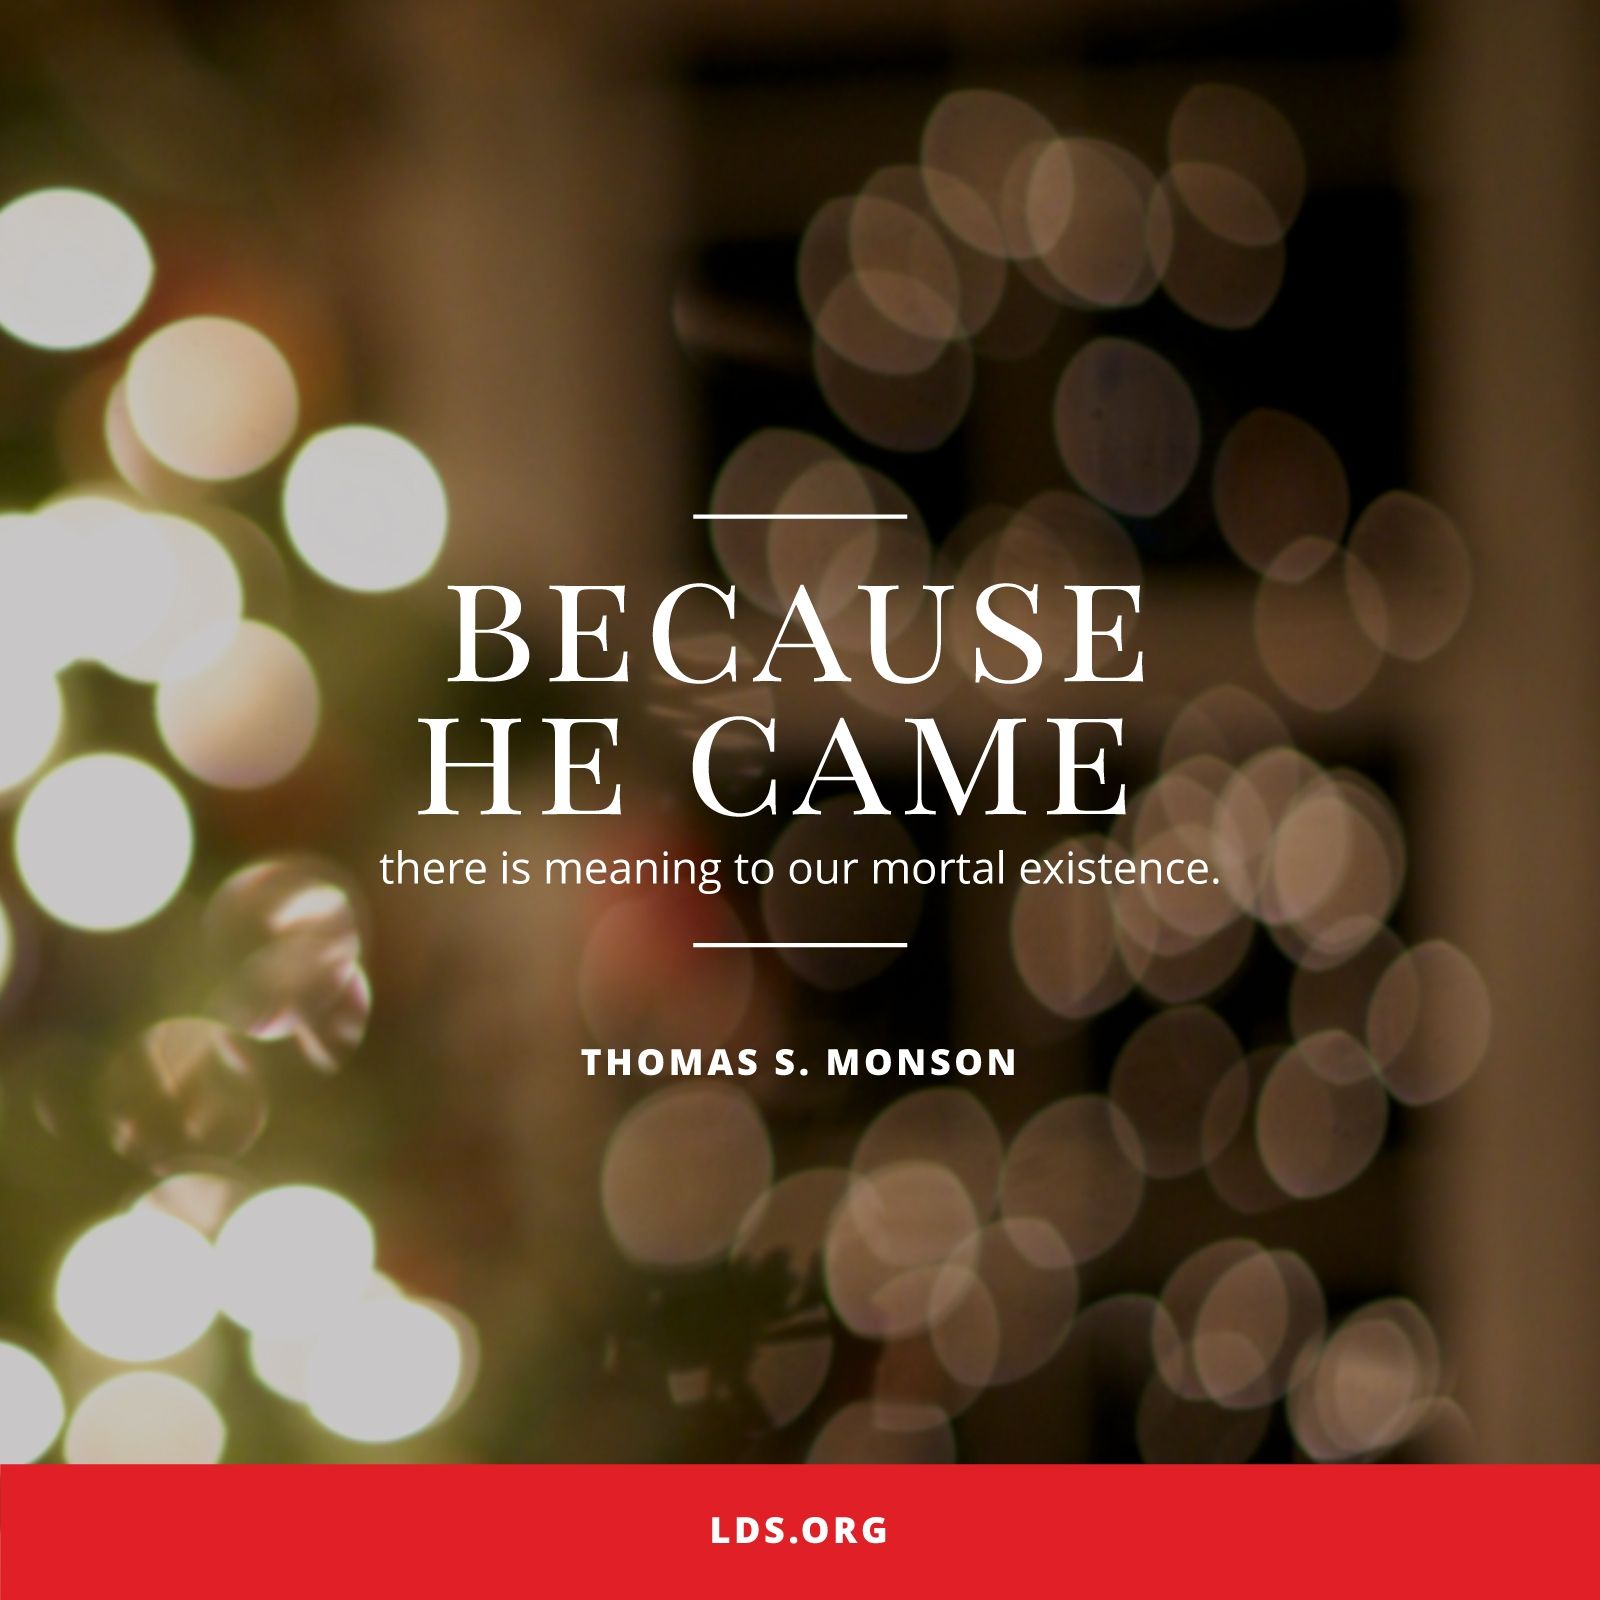 “Because He came, there is meaning to our mortal existence.”—President Thomas S. Monson, “Because He Came” © undefined ipCode 1.